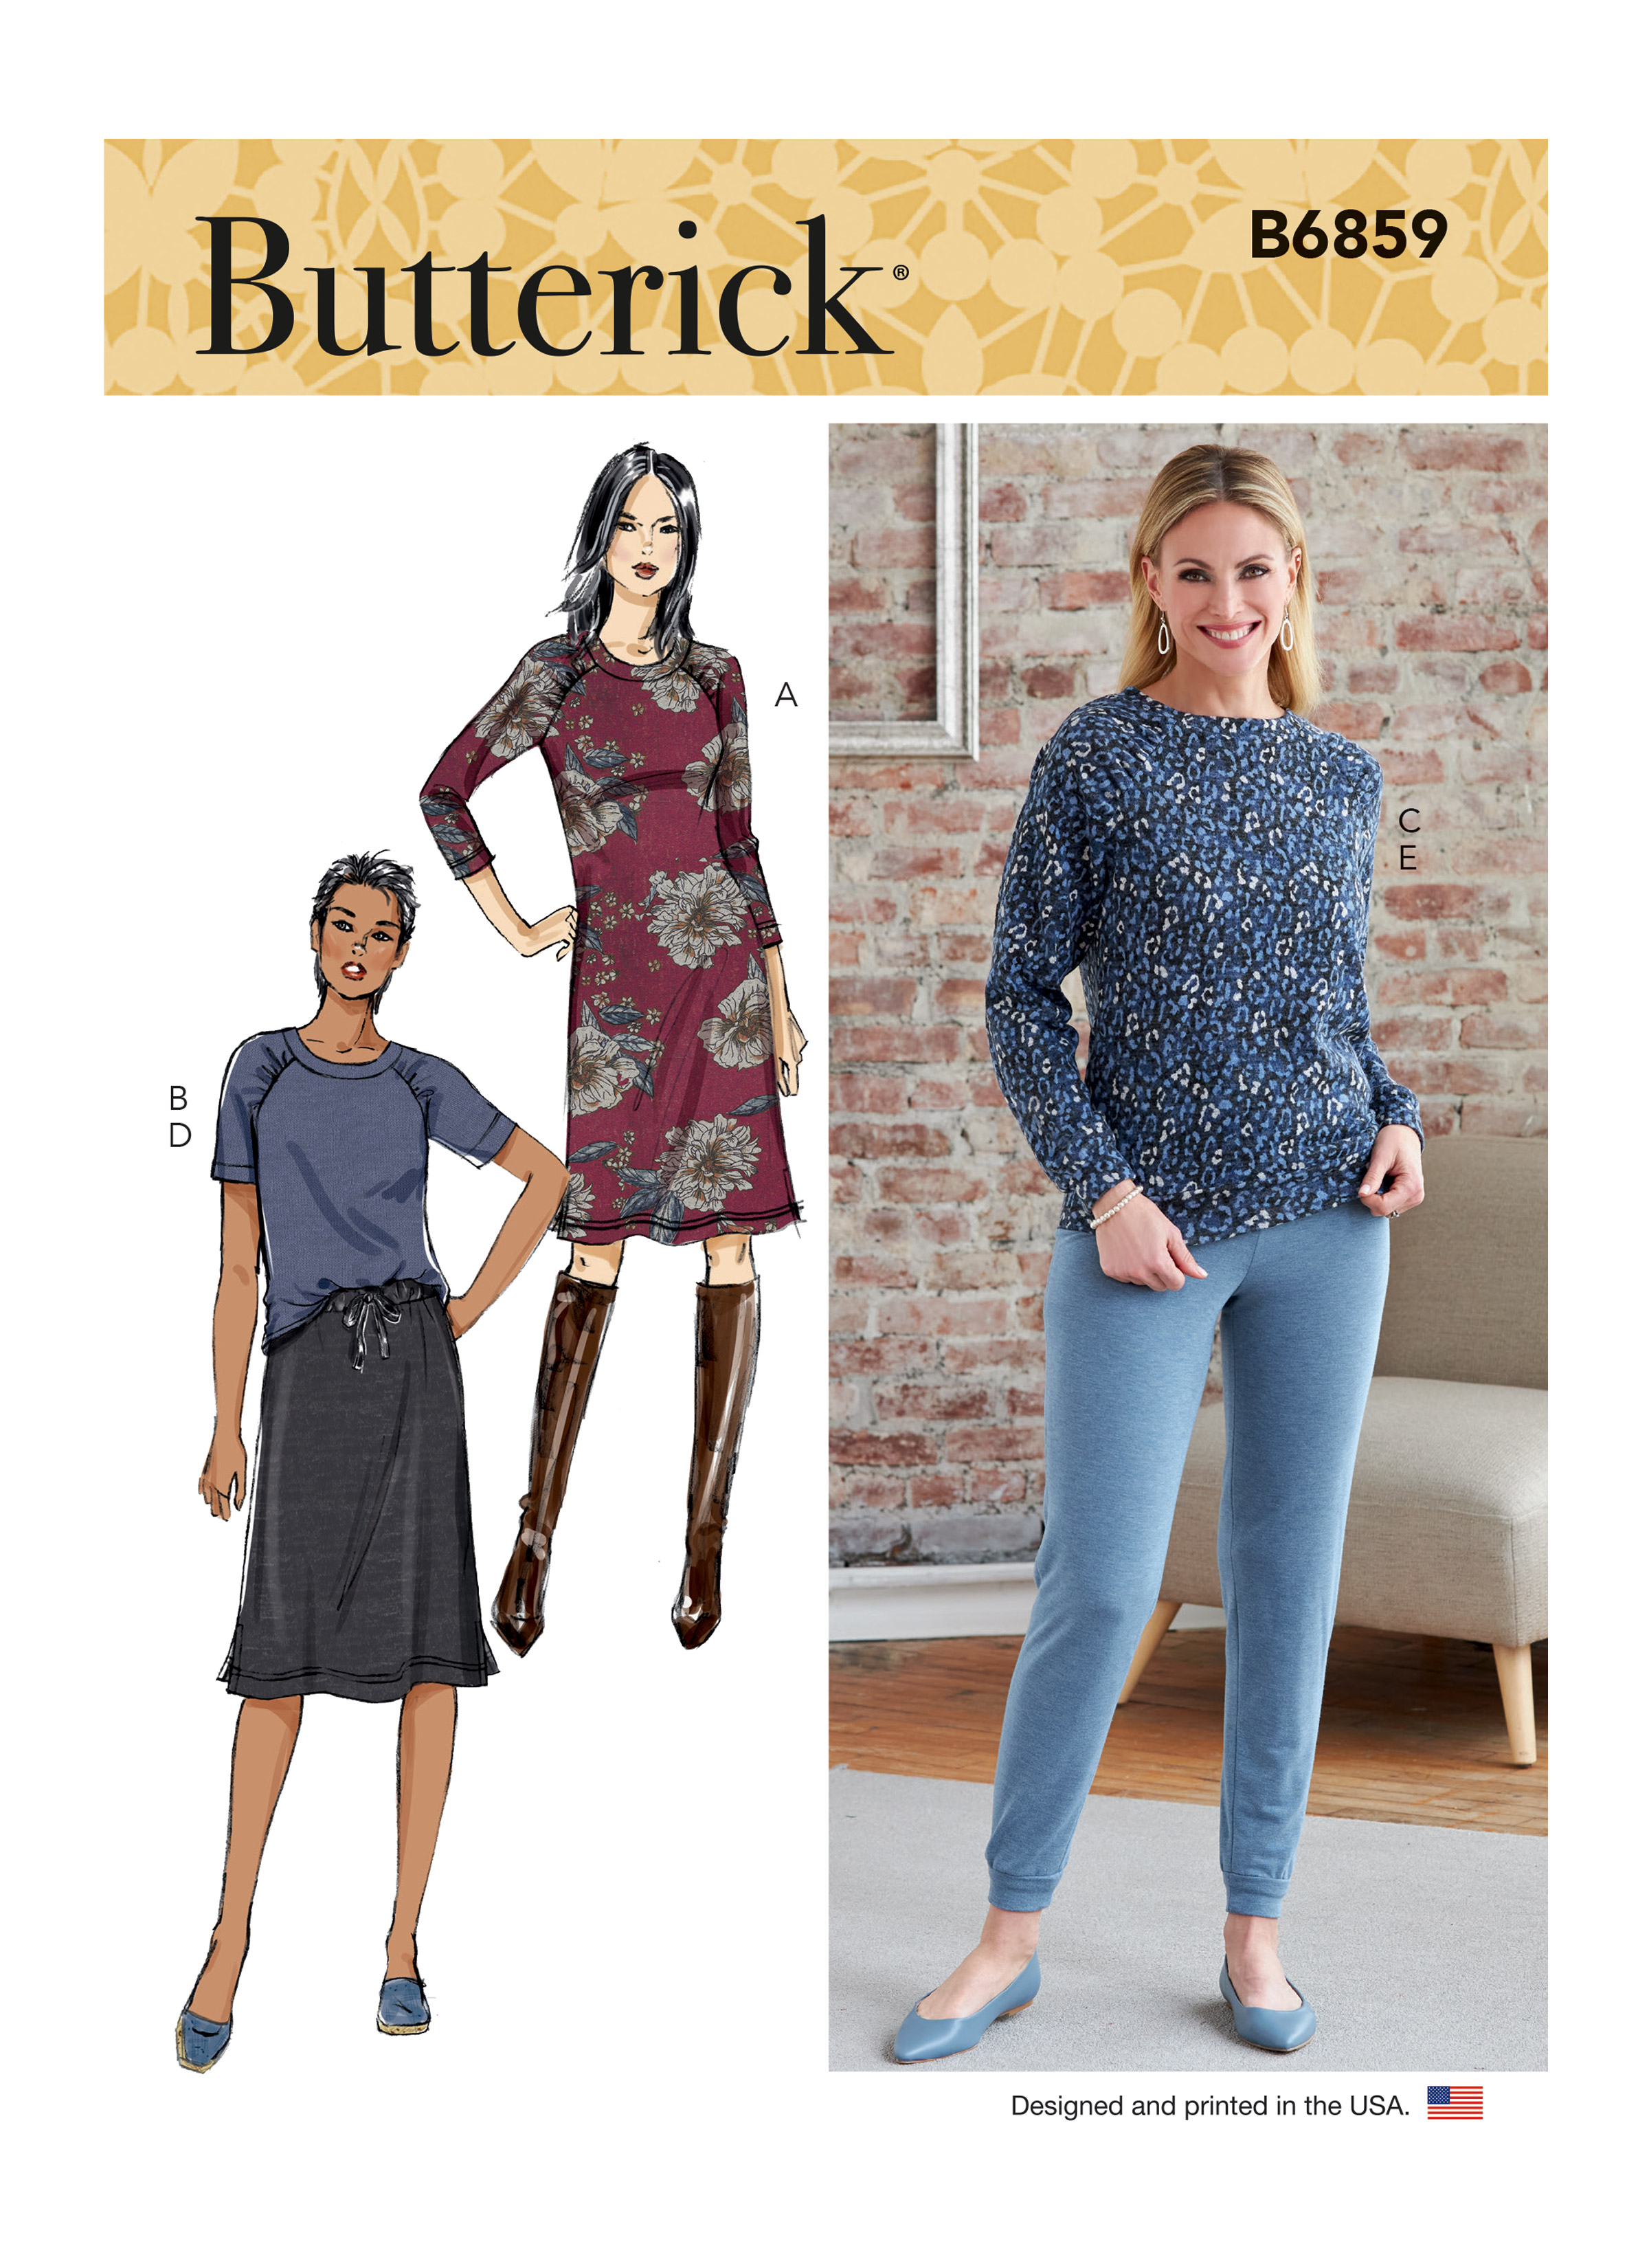 Butterick 6859 Misses' Knit Dress, Tops, Skirt and Pants